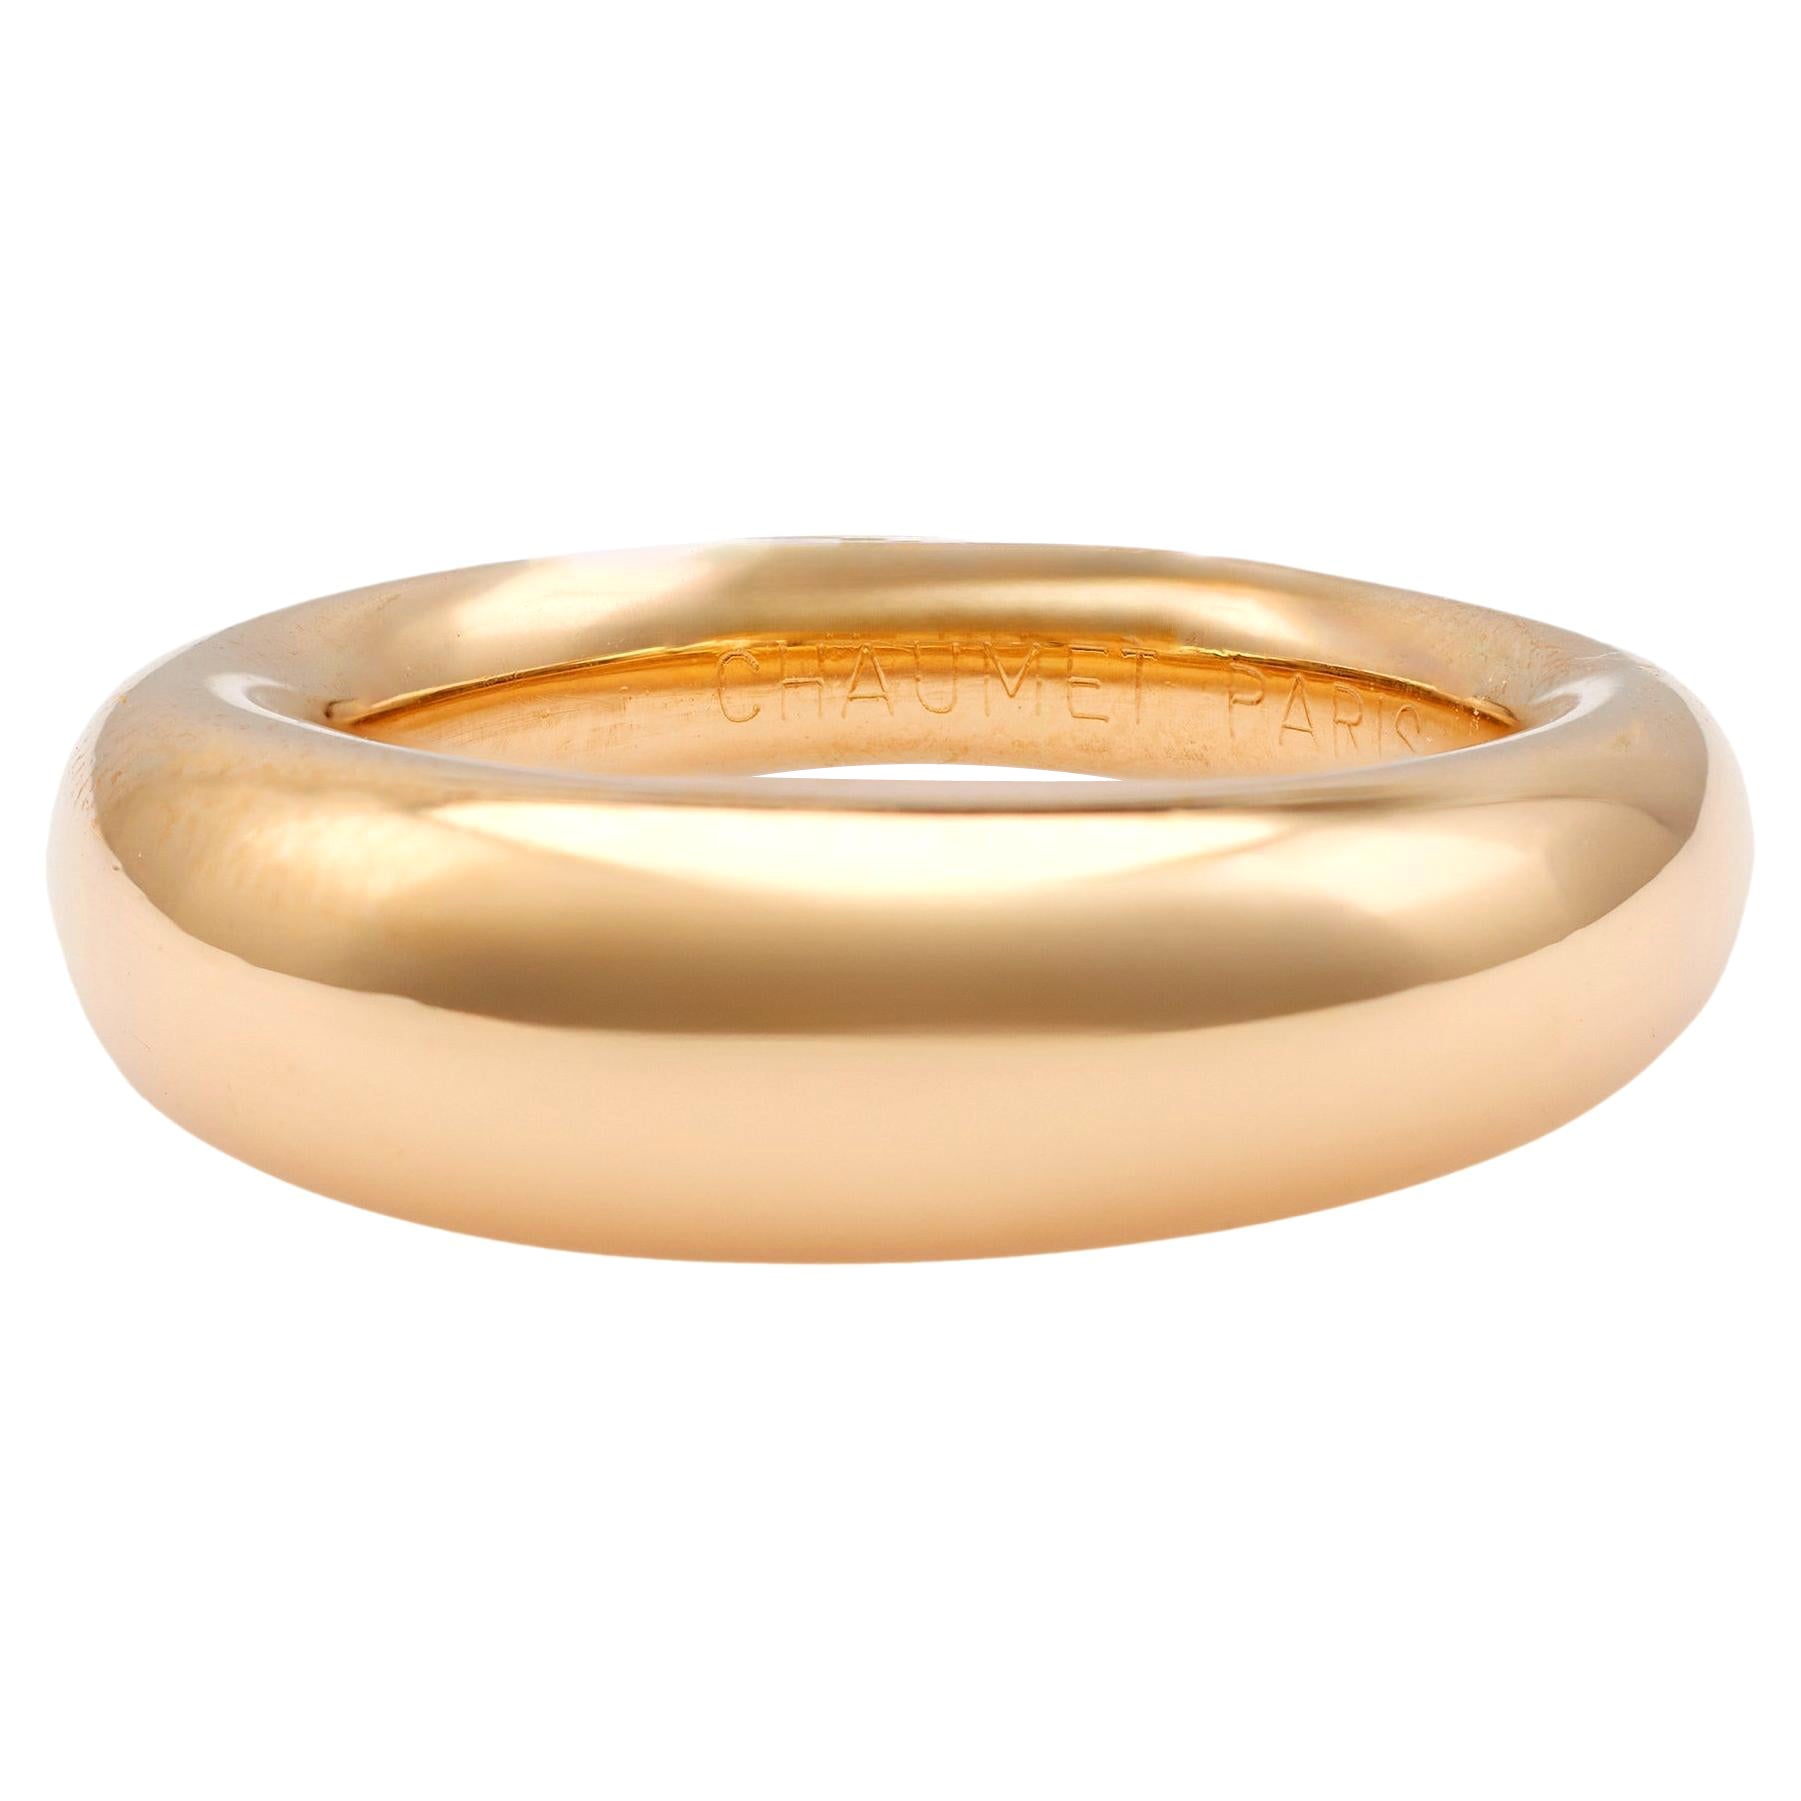 Vintage Chaumet 18k Yellow Gold Anneau Dome Ring